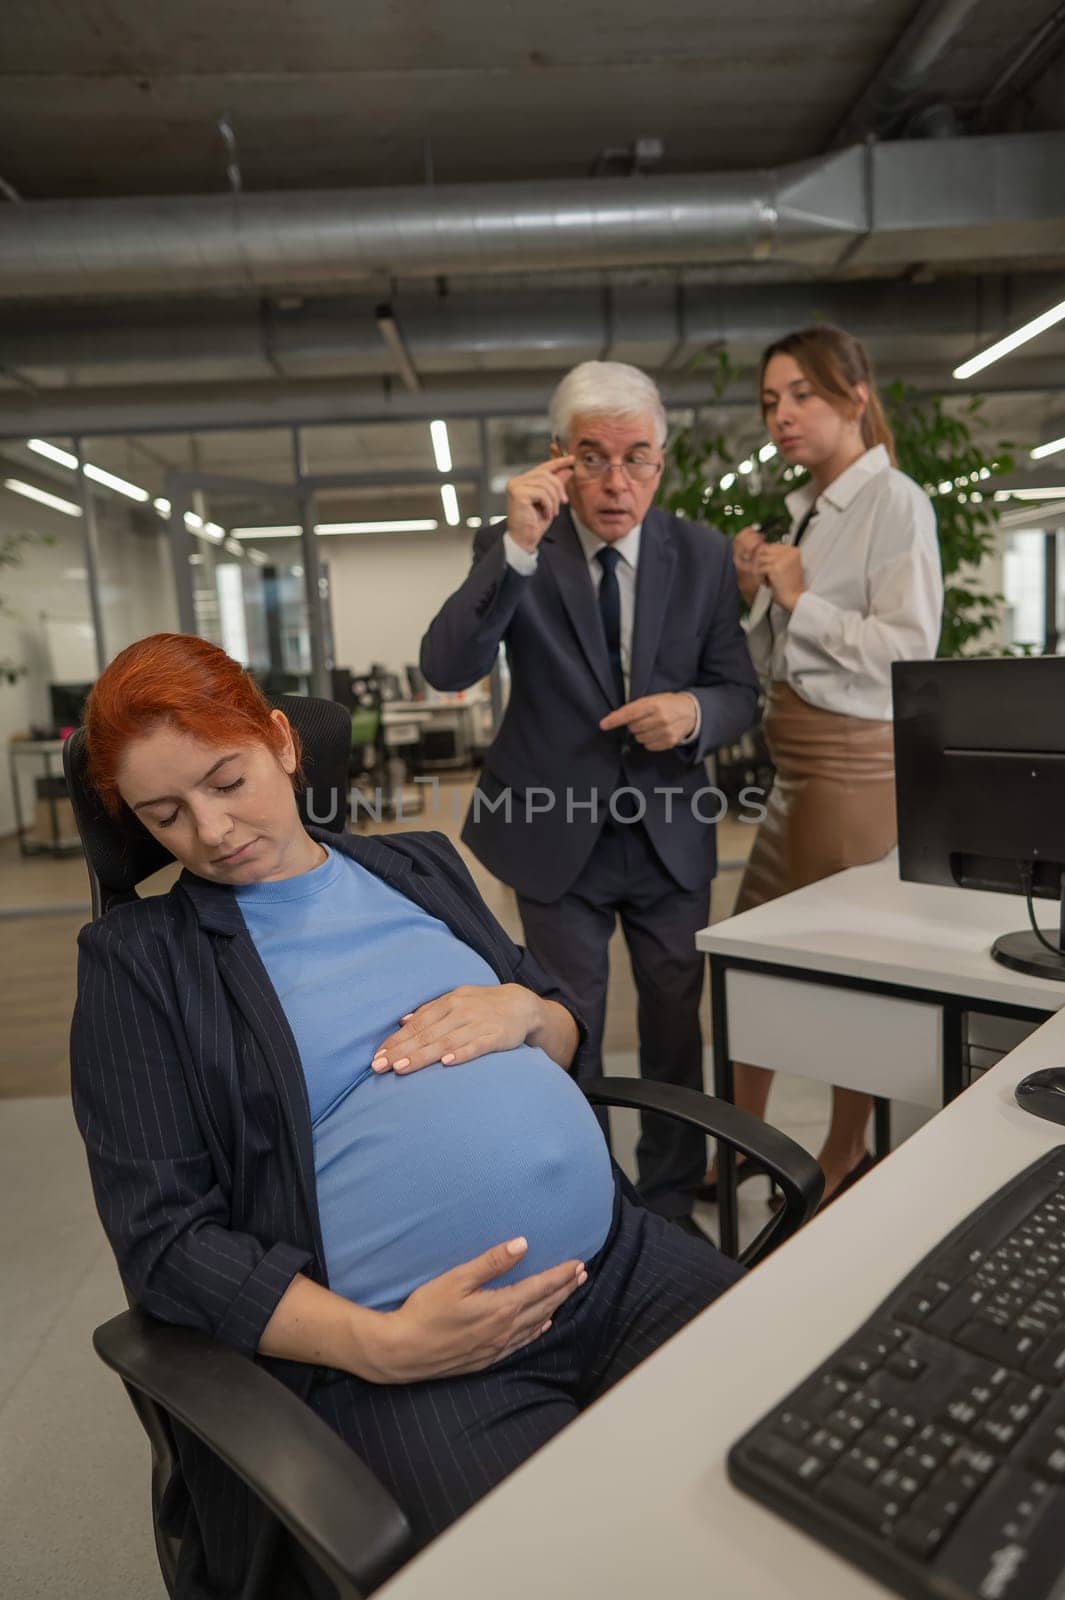 Elderly Caucasian man and woman gossiping behind their sleeping pregnant colleague in the office. Vertical photo. by mrwed54